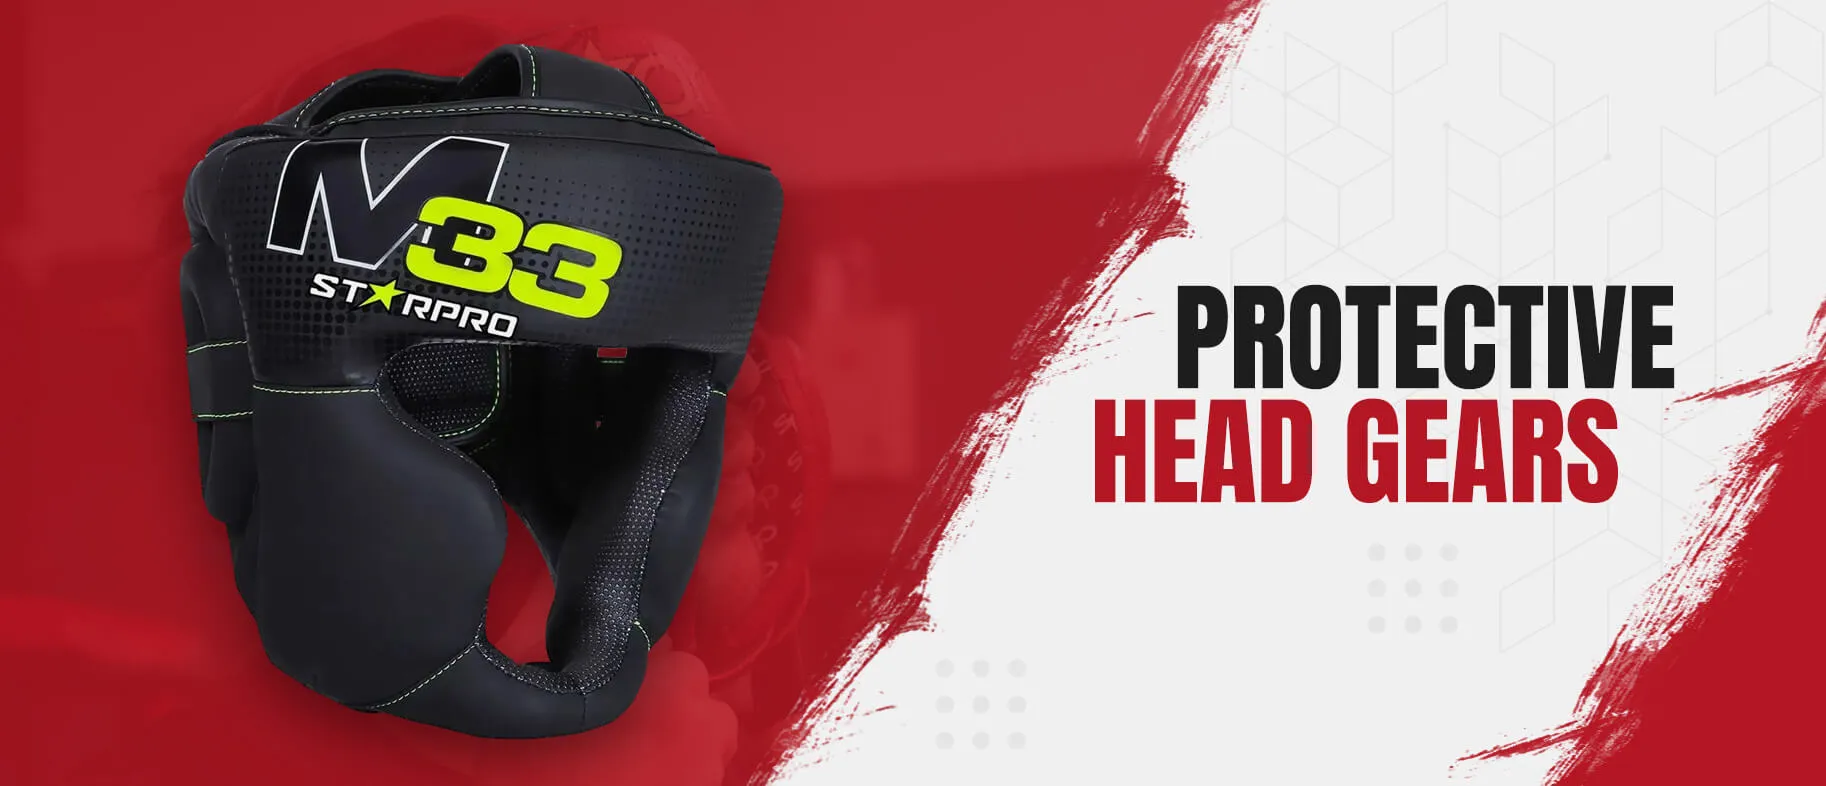 Get Protective head guards for your next fight and be safe | StarPro